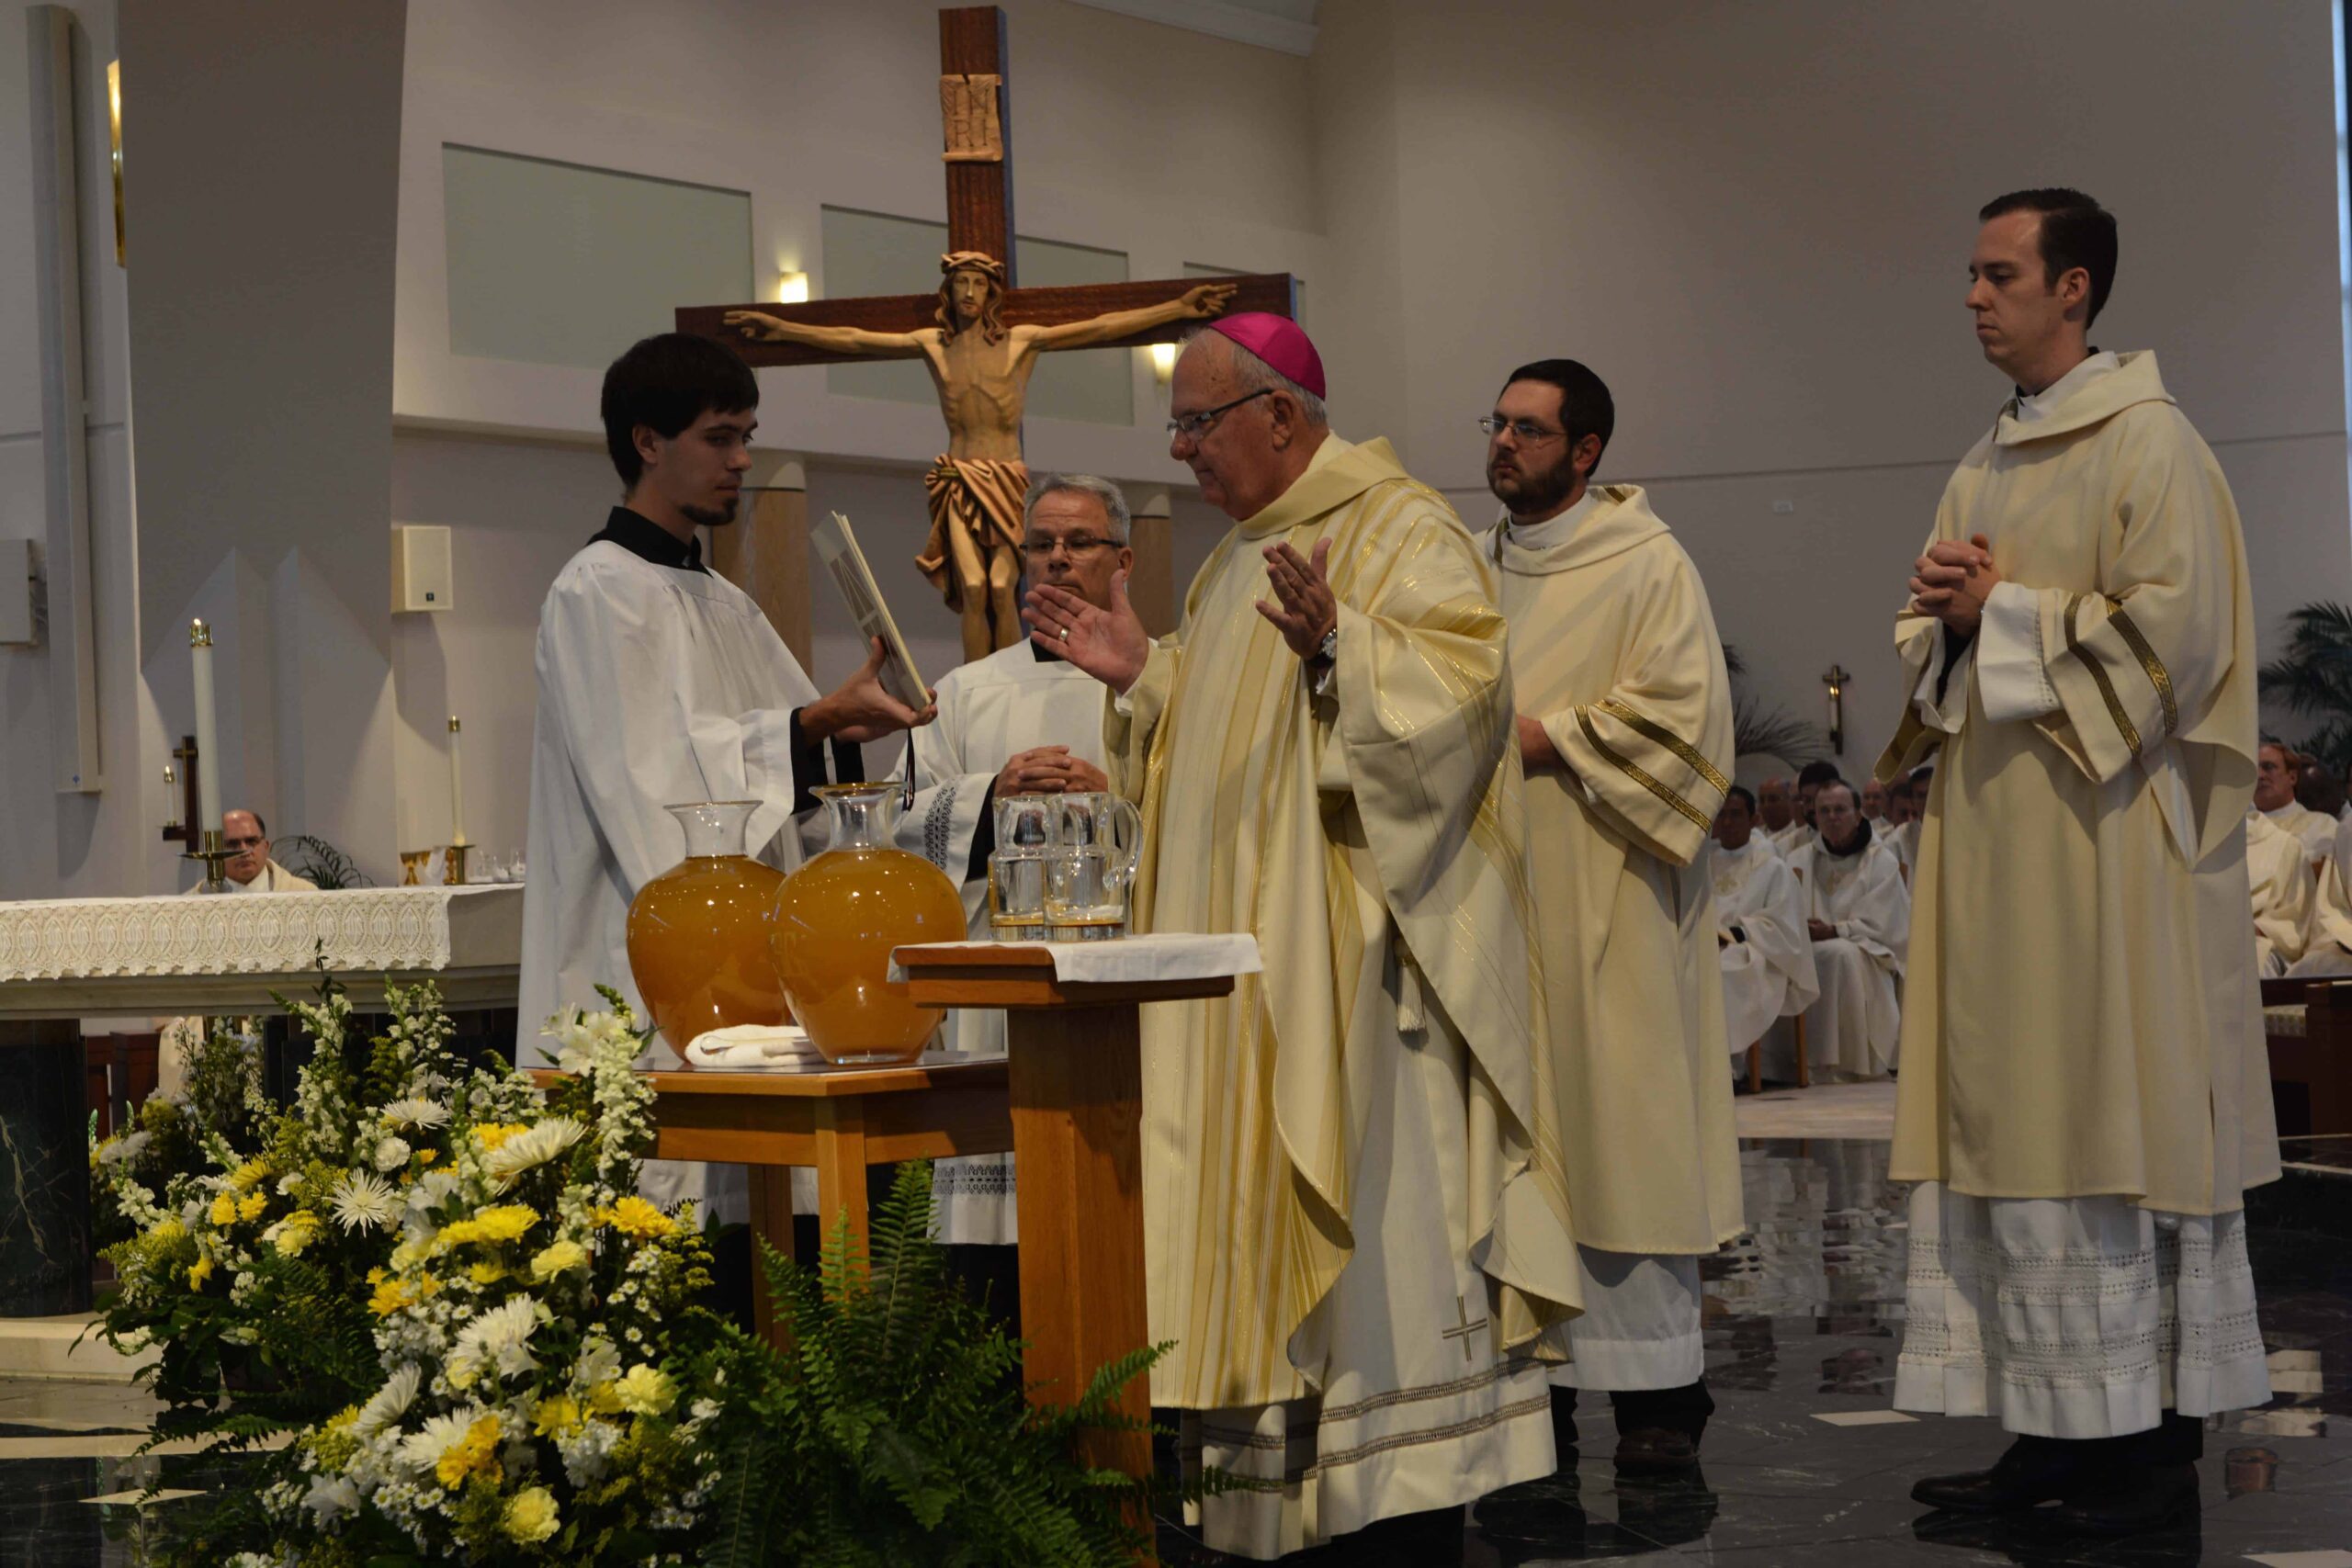 Bishop Lynch consecrating the Sacred Chrism. Photo credit: Maria Mertens